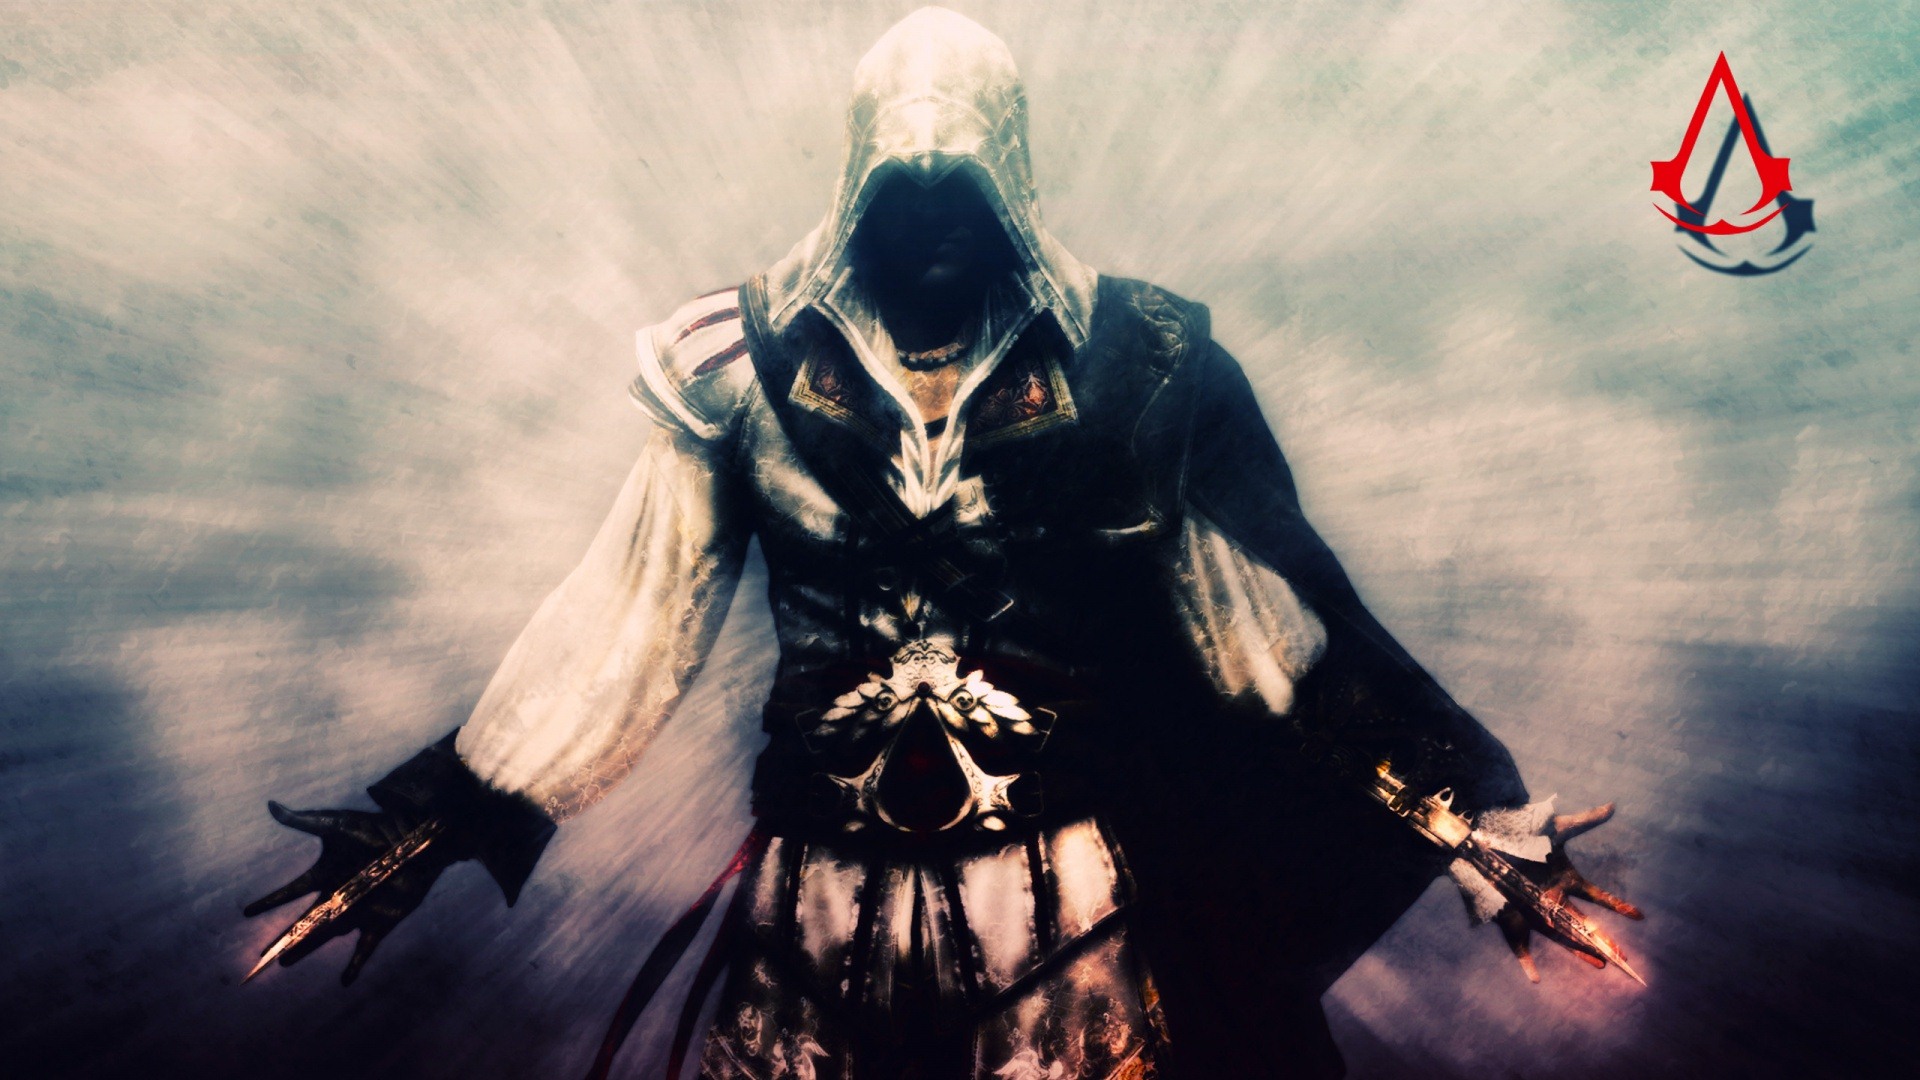 Assassin's Creed: Revelations HD wallpapers #25 - 1920x1080